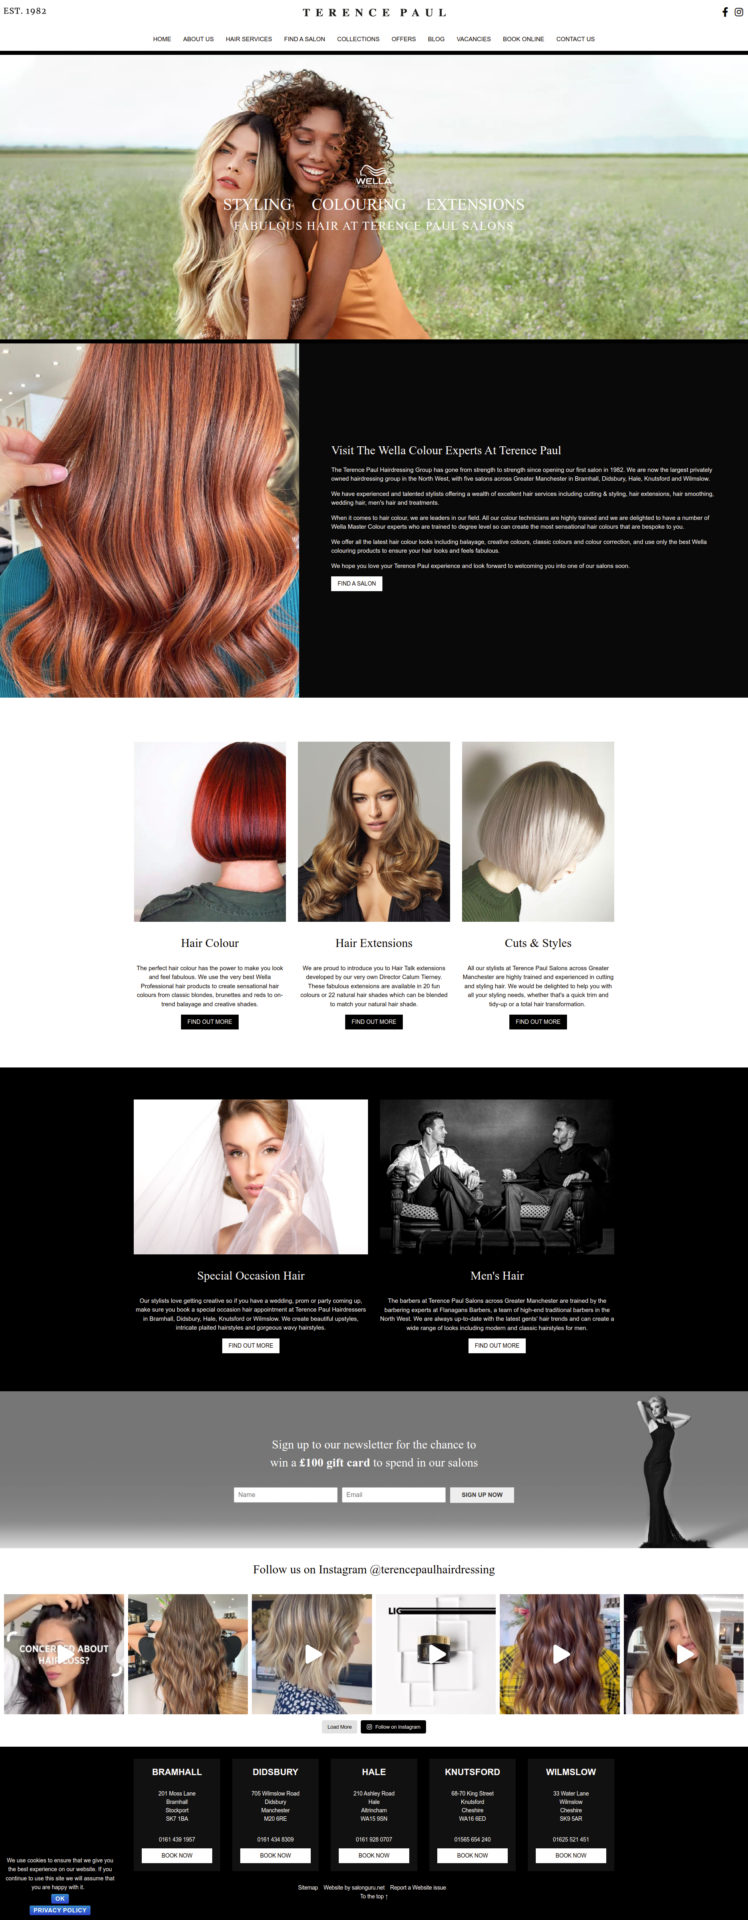 Our salon website & marketing clients in the UK & USA